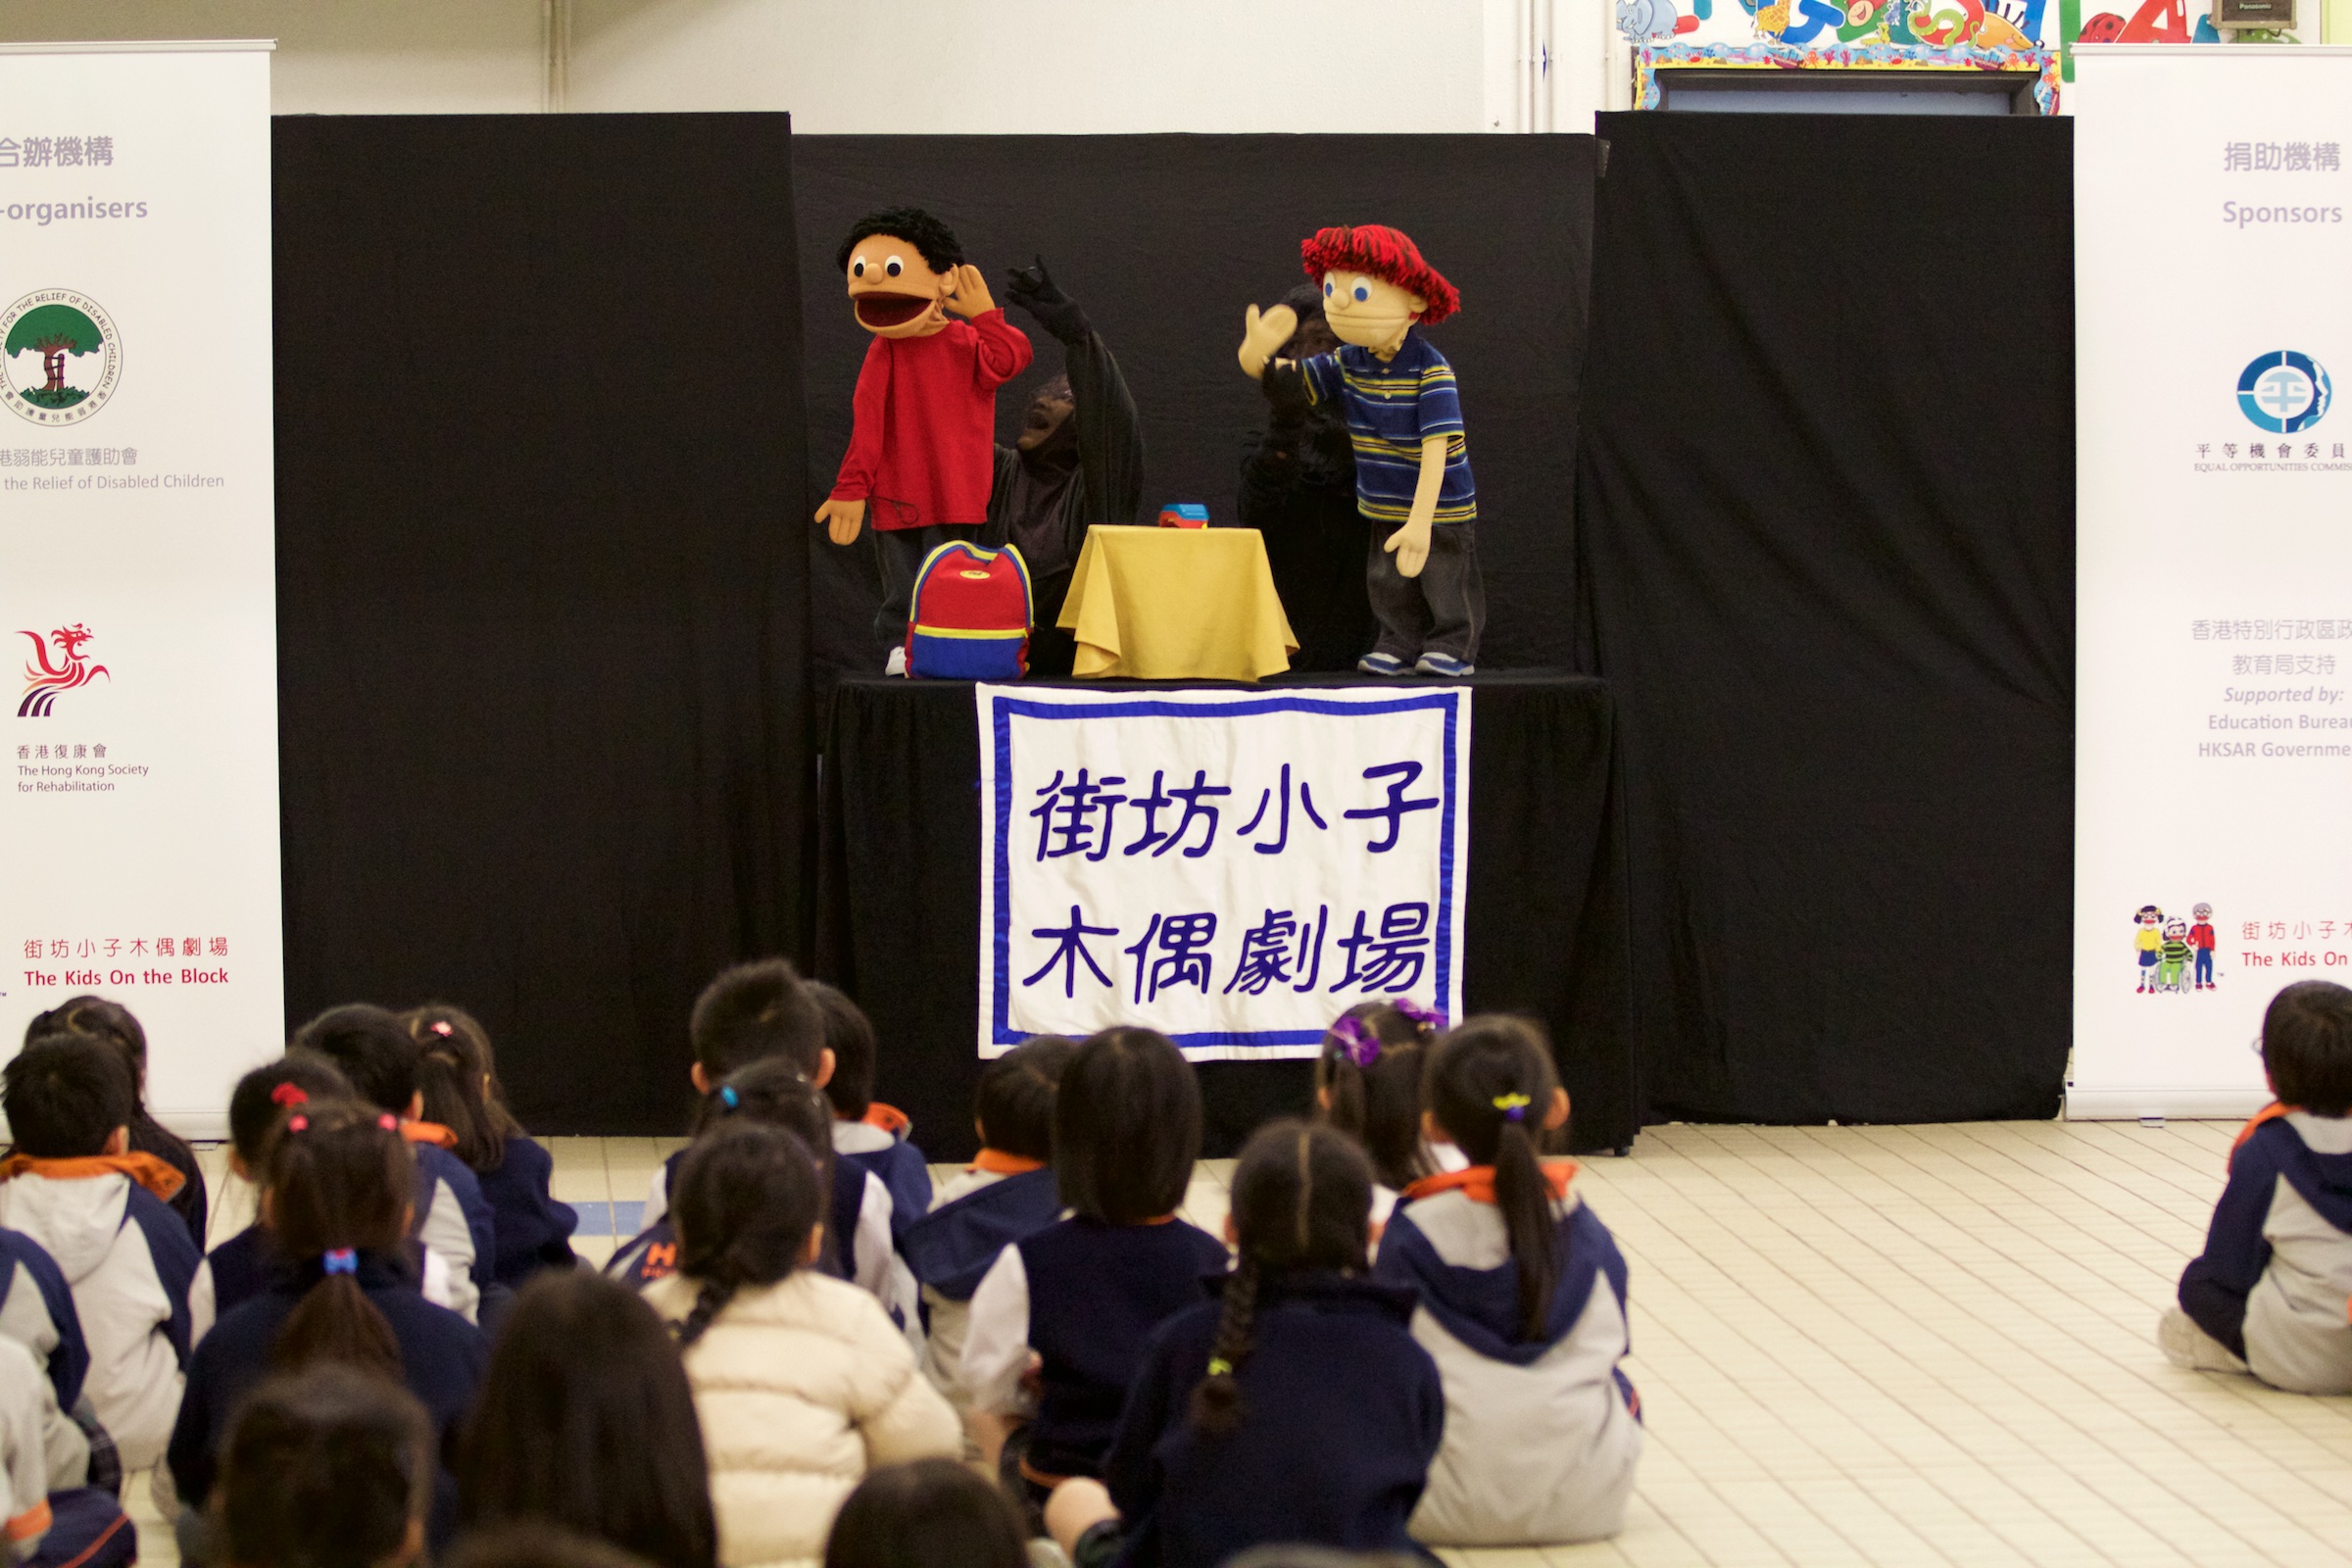 Lovely puppets came to teach us how to choose healthy snacks for ourselves.